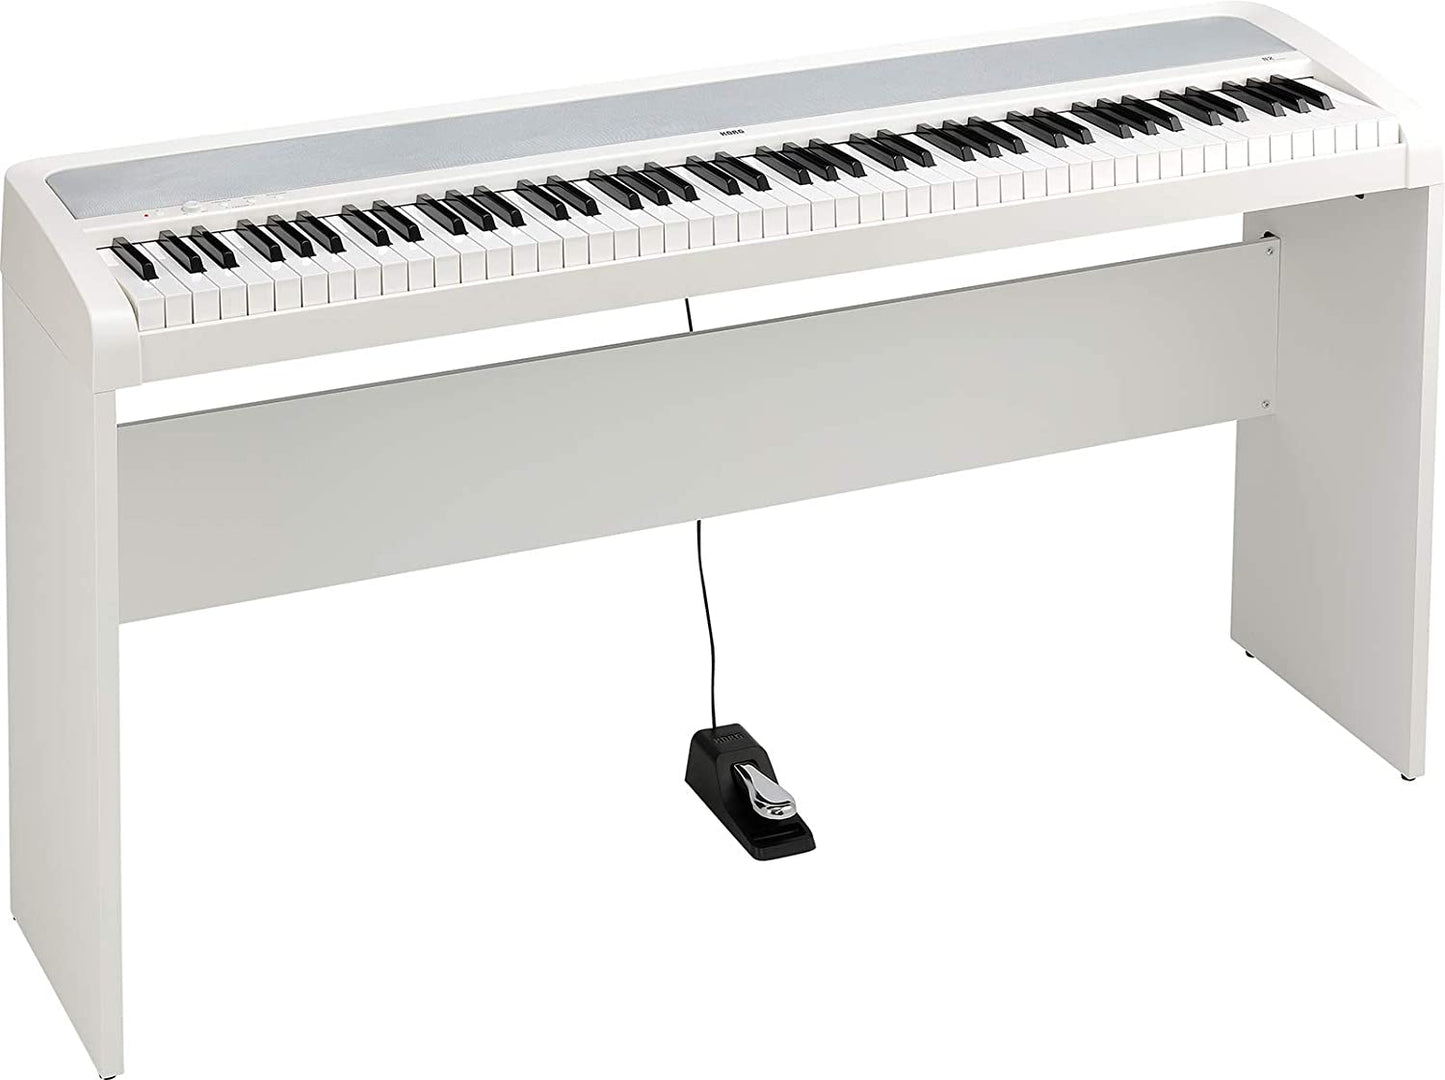 B2N 88-Key Digital Piano with Light Touch Action and Speakers - Black